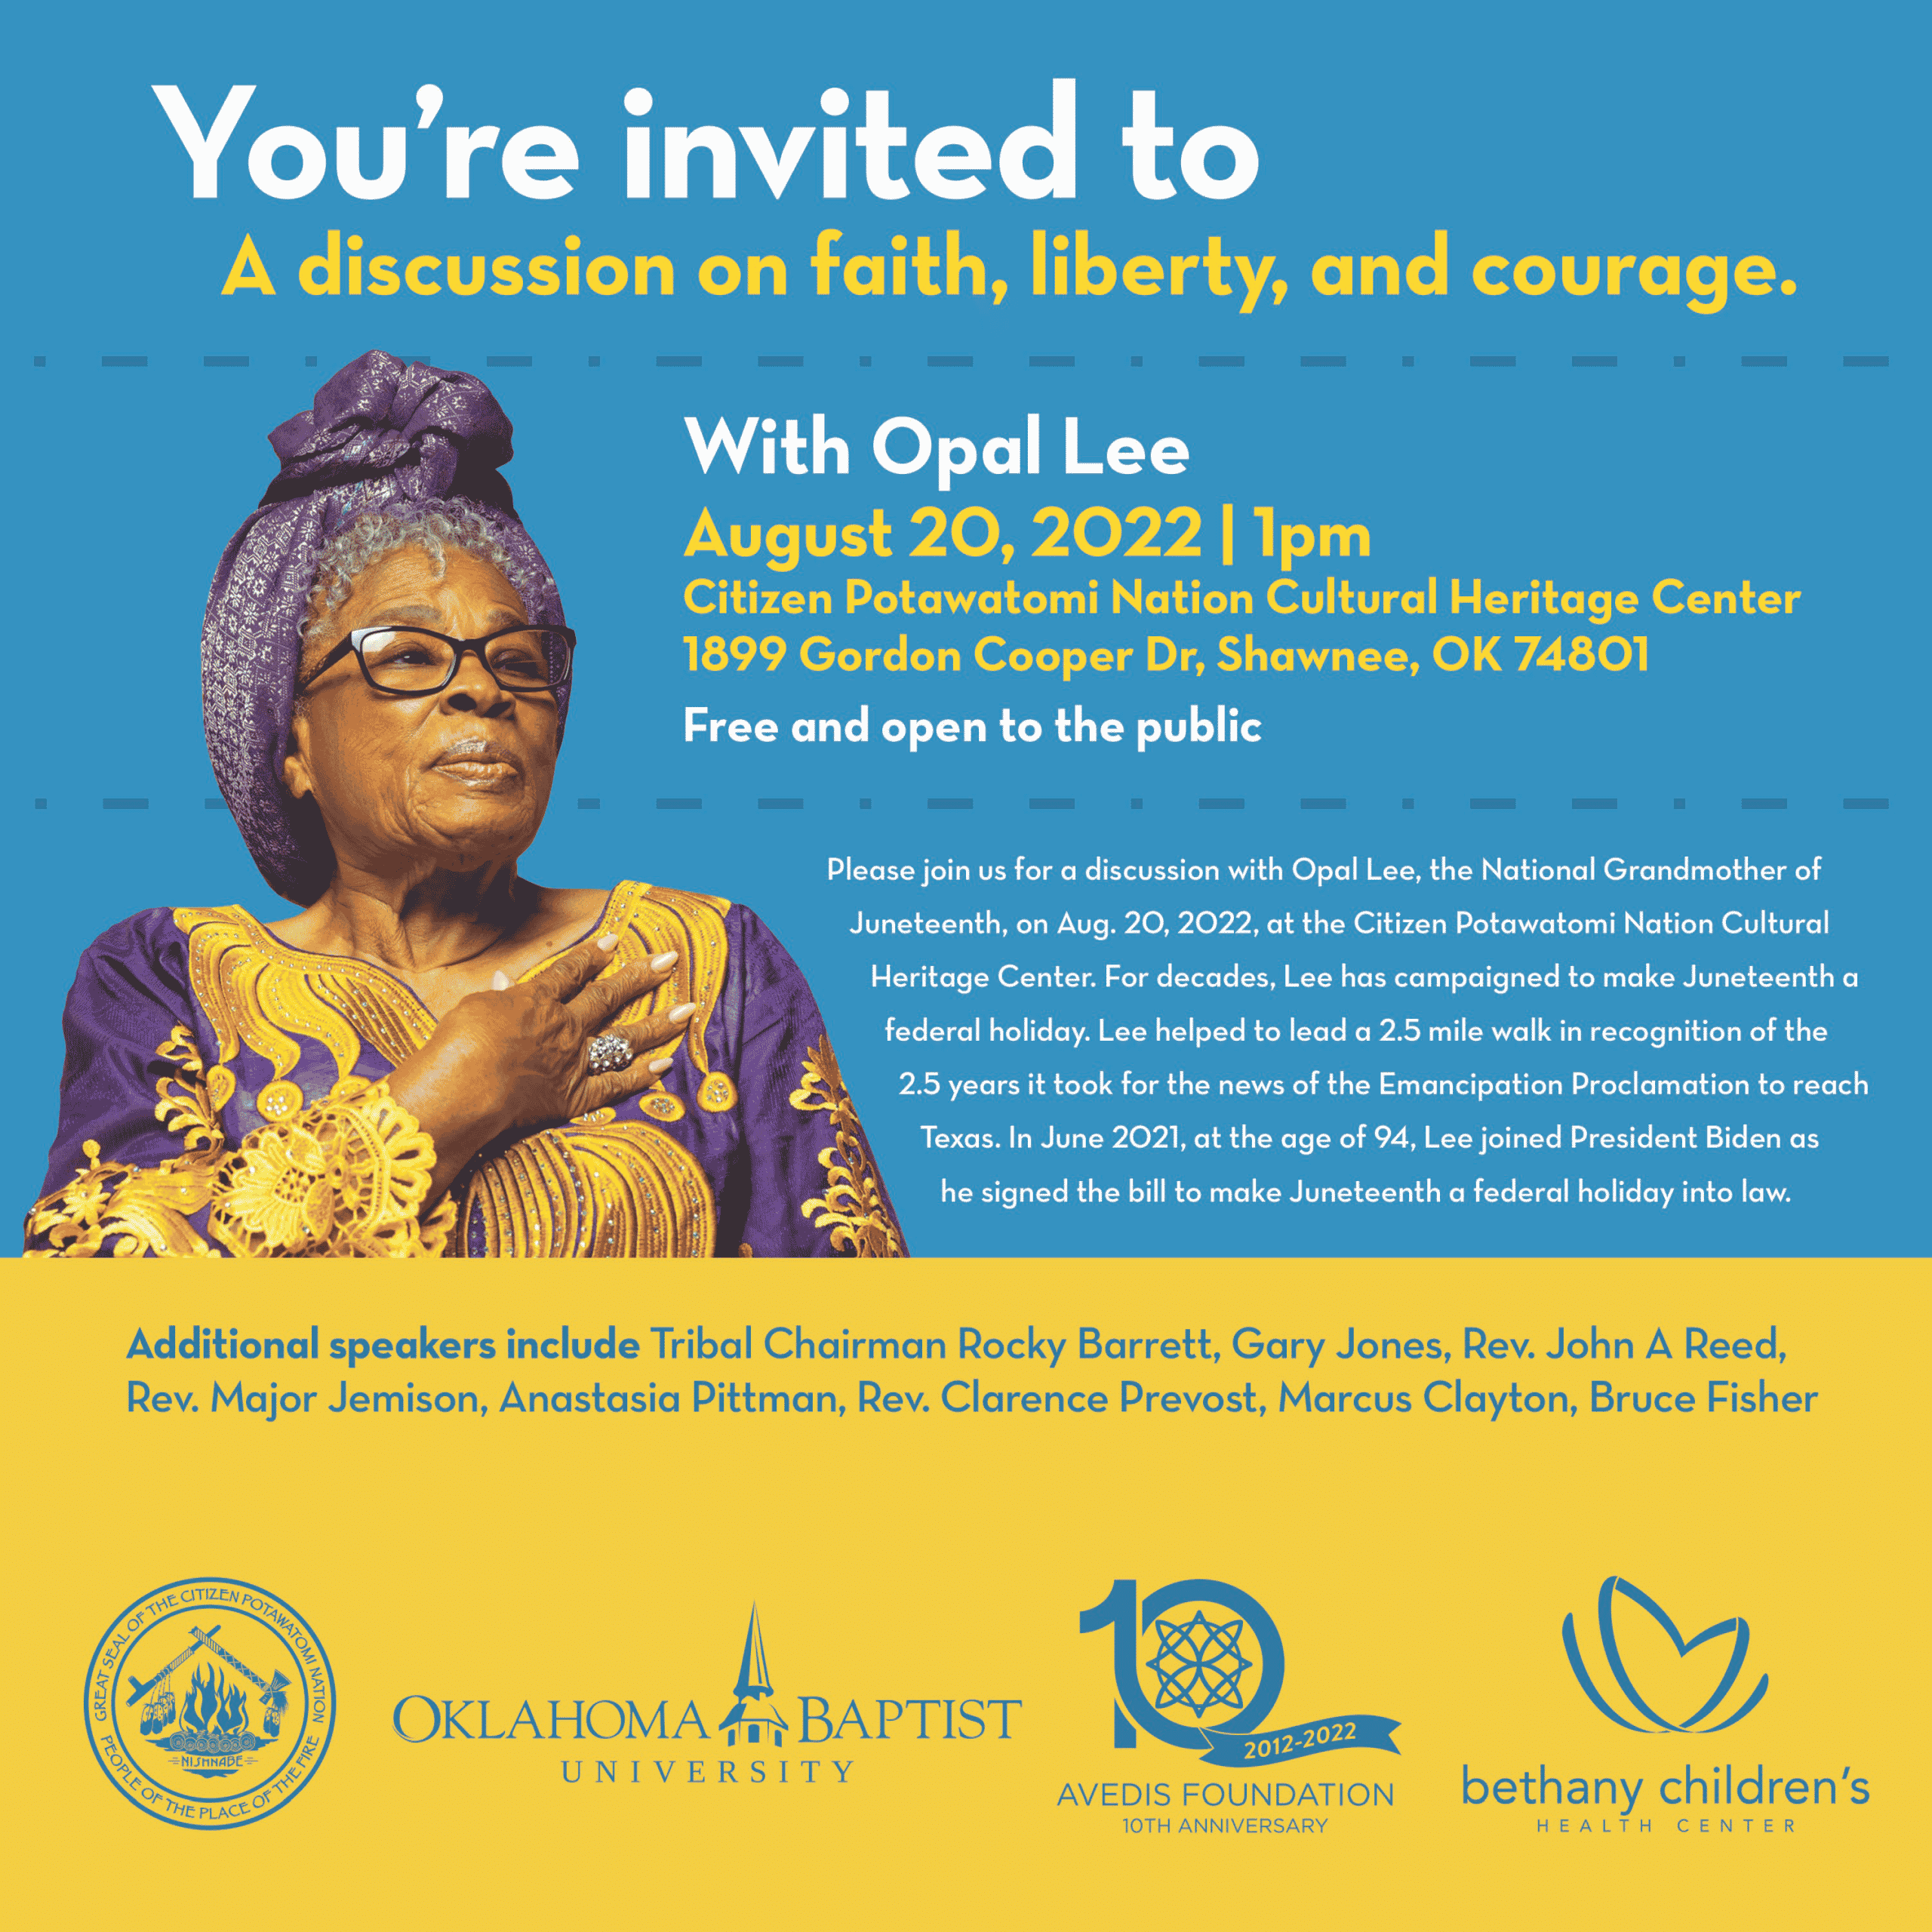 Blue and gold flyer advertising a discussion event with Opal Lee, National Grandmother of Juneteenth. A photograph of Lee in a purple and gold dress and turban, with her hand across her heart, sits at the center left of the flyer. Text reads: "Your're invited to a discussion on faith, liberty and courage with Opal Lee, the National Grandmother of Juneteenth, on August 20, 2022, at the Citizen Potawatomi Nation Cultural Heritage Center. For decades, Lee has campaigned to make Juneteenth a federal holiday. Lee helped to lead a 2.5 mile walk in recognition of the 2.5 years it took for the news of the Emancipation Proclamation to reach Texas. In June 2021, at the age of 94, Lee joined President Biden as he signed the bill to make Juneteenth a federal holiday into law. Additional speakers include Tribal Chairman John "Rocky" Barrett, Gary Jones, Rev. John A. Reed, Rev. Major Jemison, Anastasia Pittman, Rev. Clarence Prevost, Marcus Clayton and Bruce Fisher." This event is sponsored by Citizen Potawatomi Nation, Oklahoma Baptist University, the Avedis Foundation and Bethany Children's Health Center.